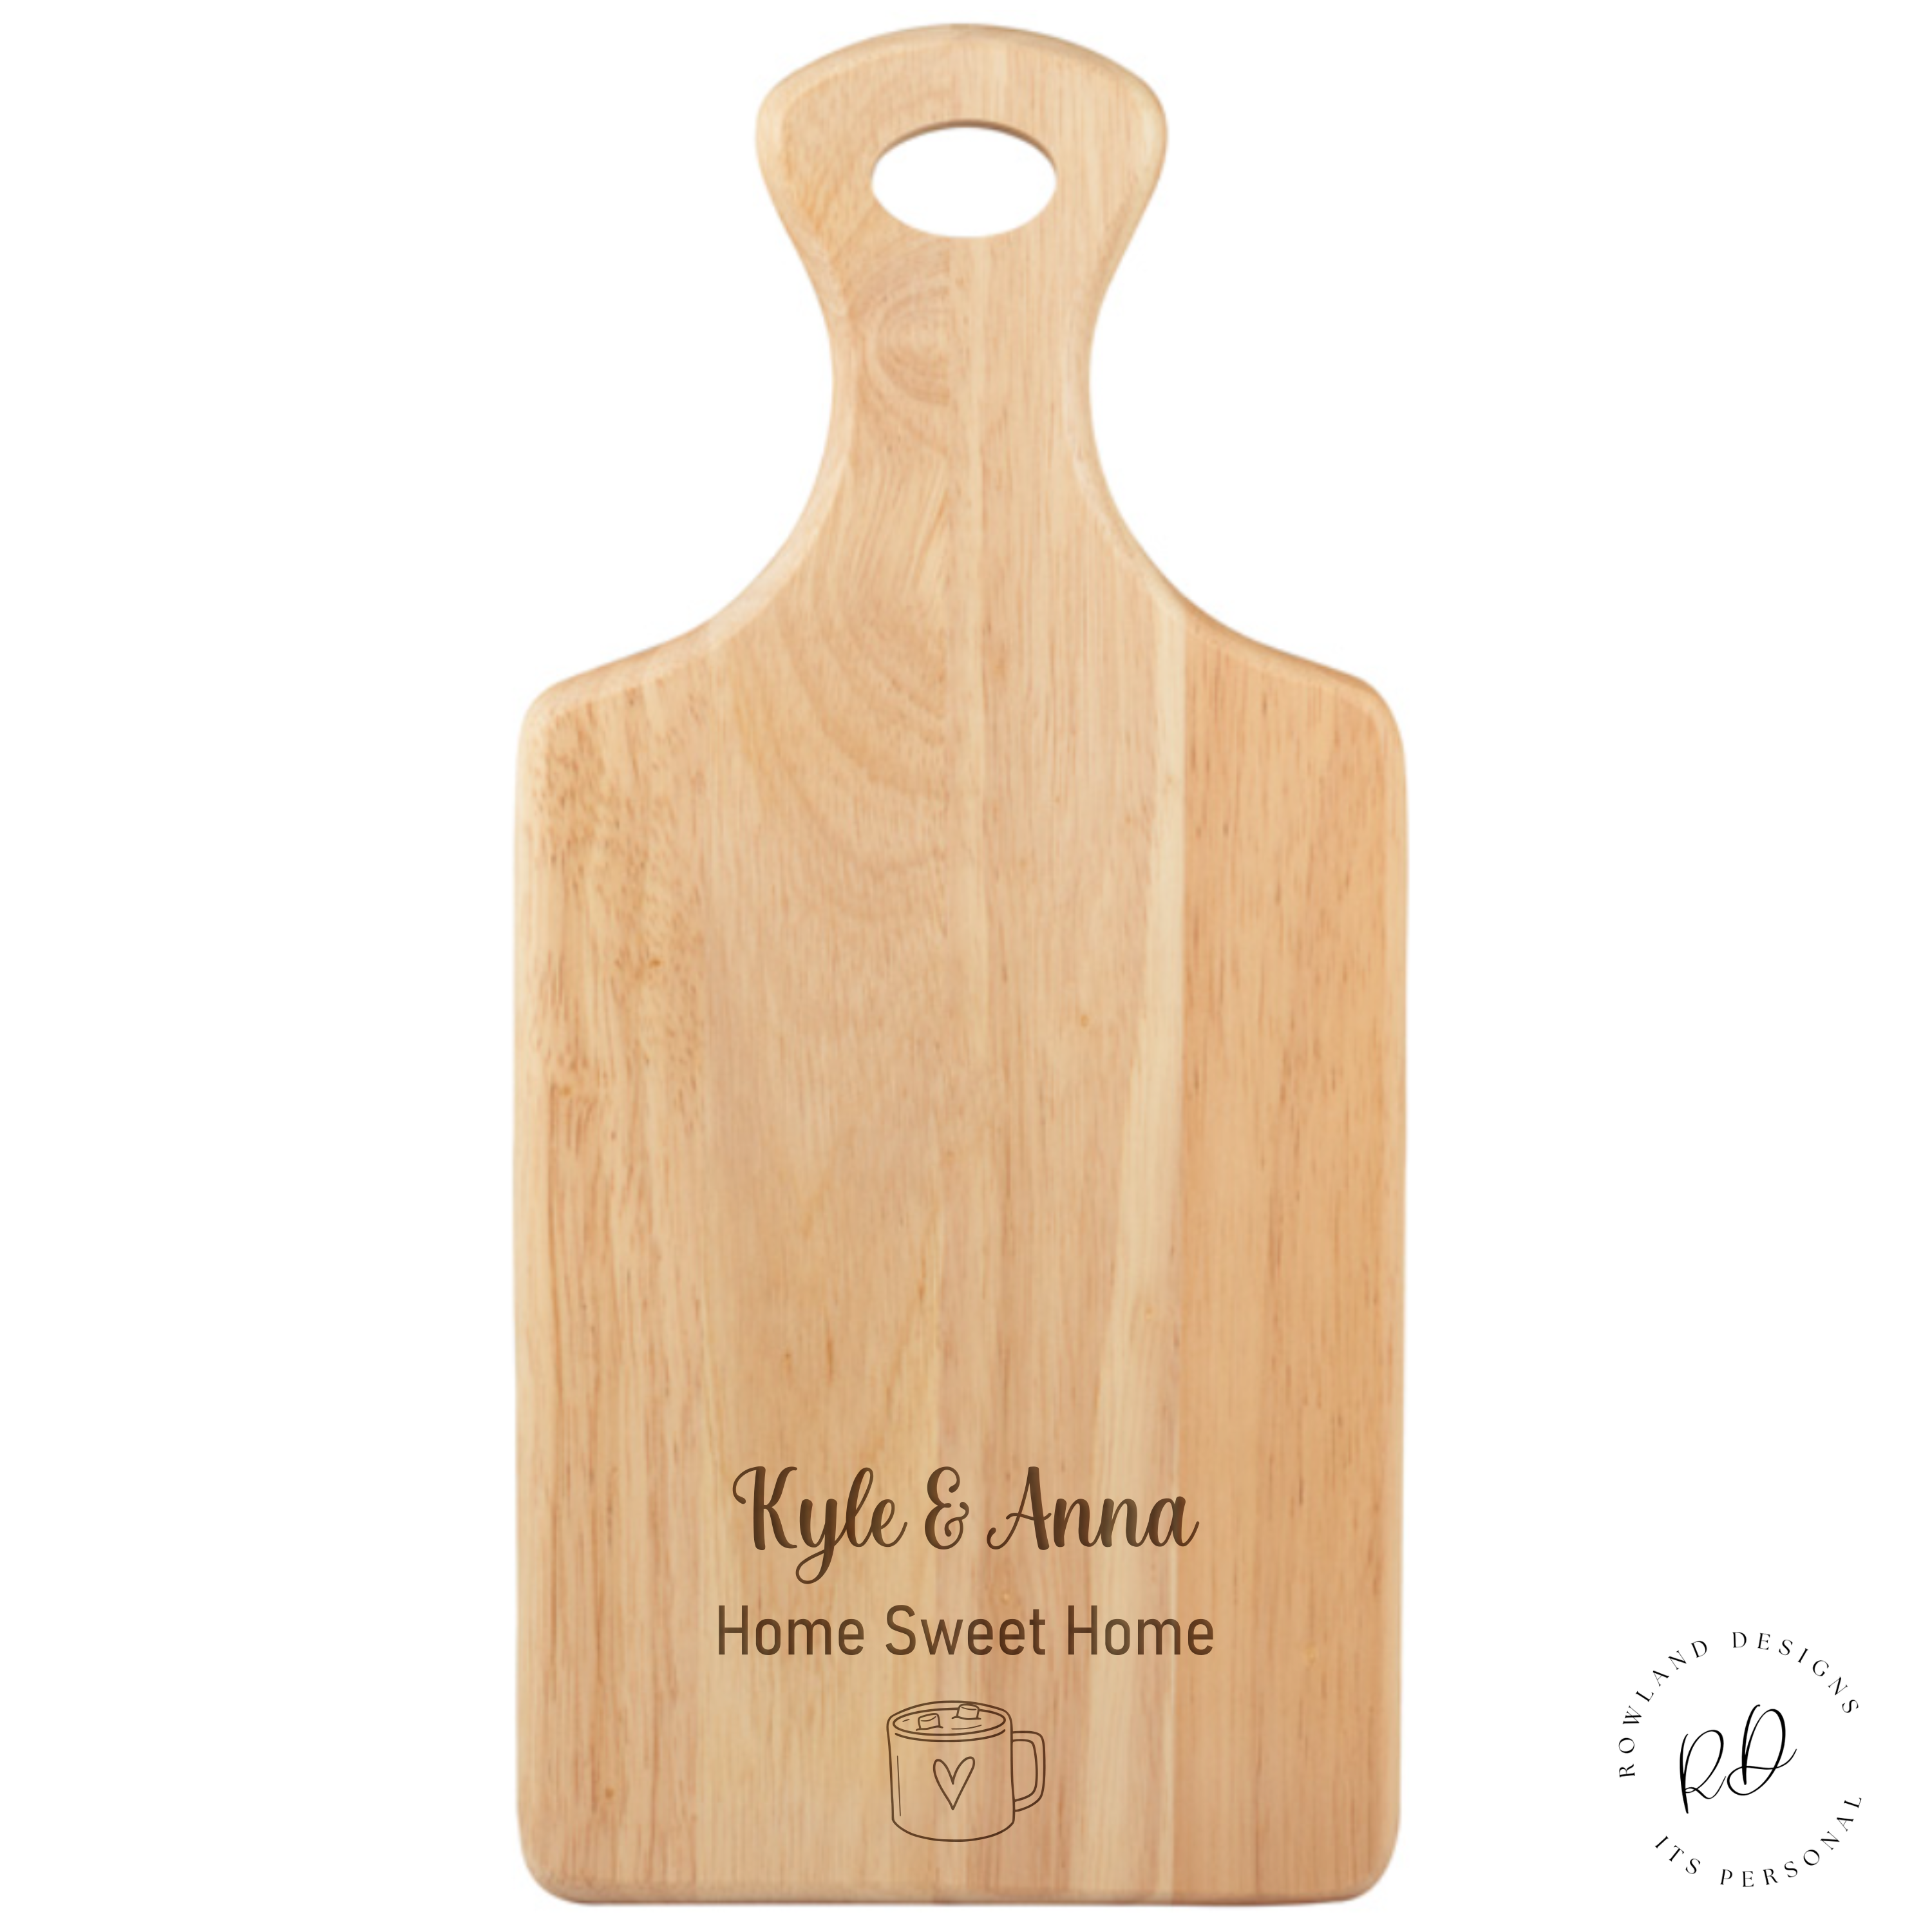 Personalized Serving Board with Custom Text and Engraved Hot Chocolate Image